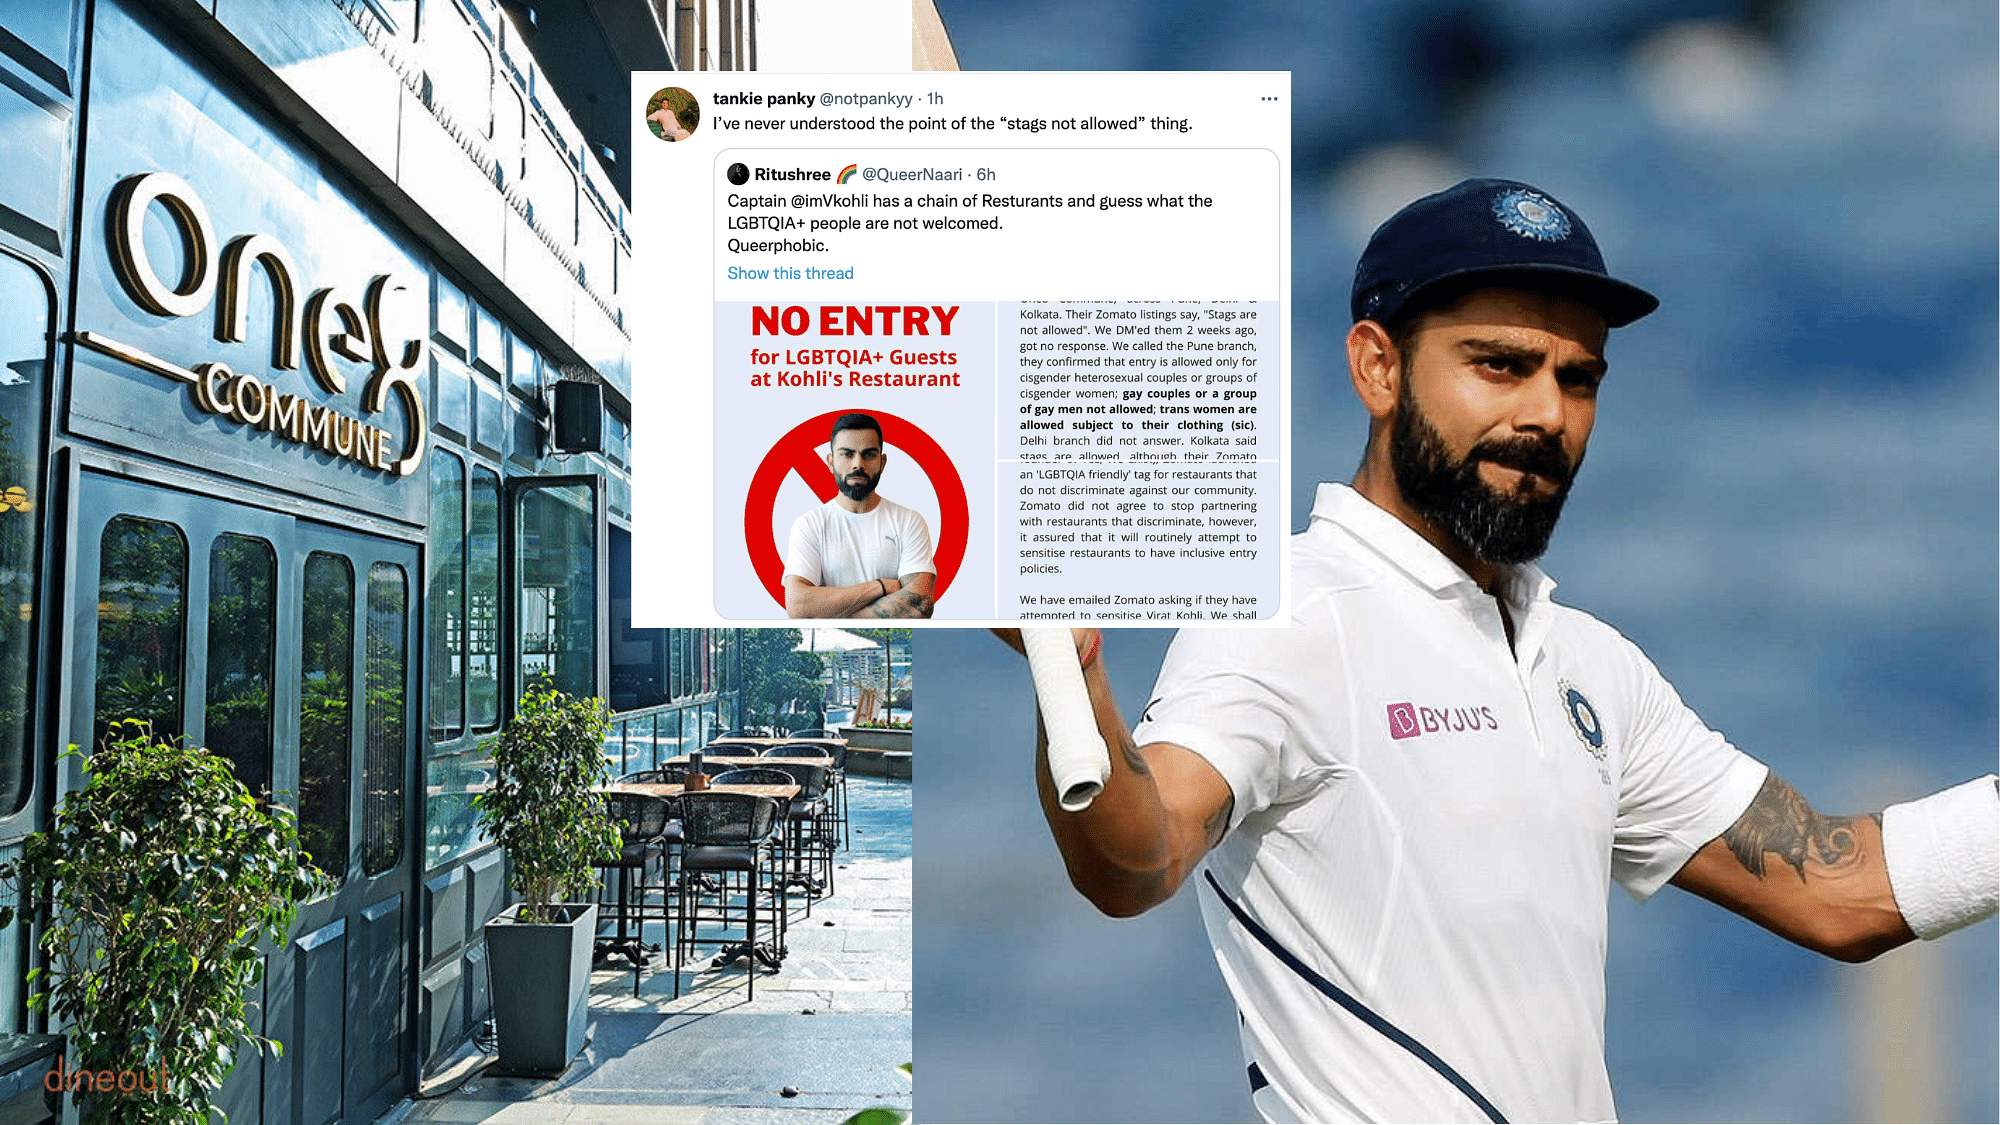 <div class="paragraphs"><p>One8 Commune, a restaurant chain owned by Virat Kohli faces backlash for discriminating against LGBTQIA+ guests.</p></div>